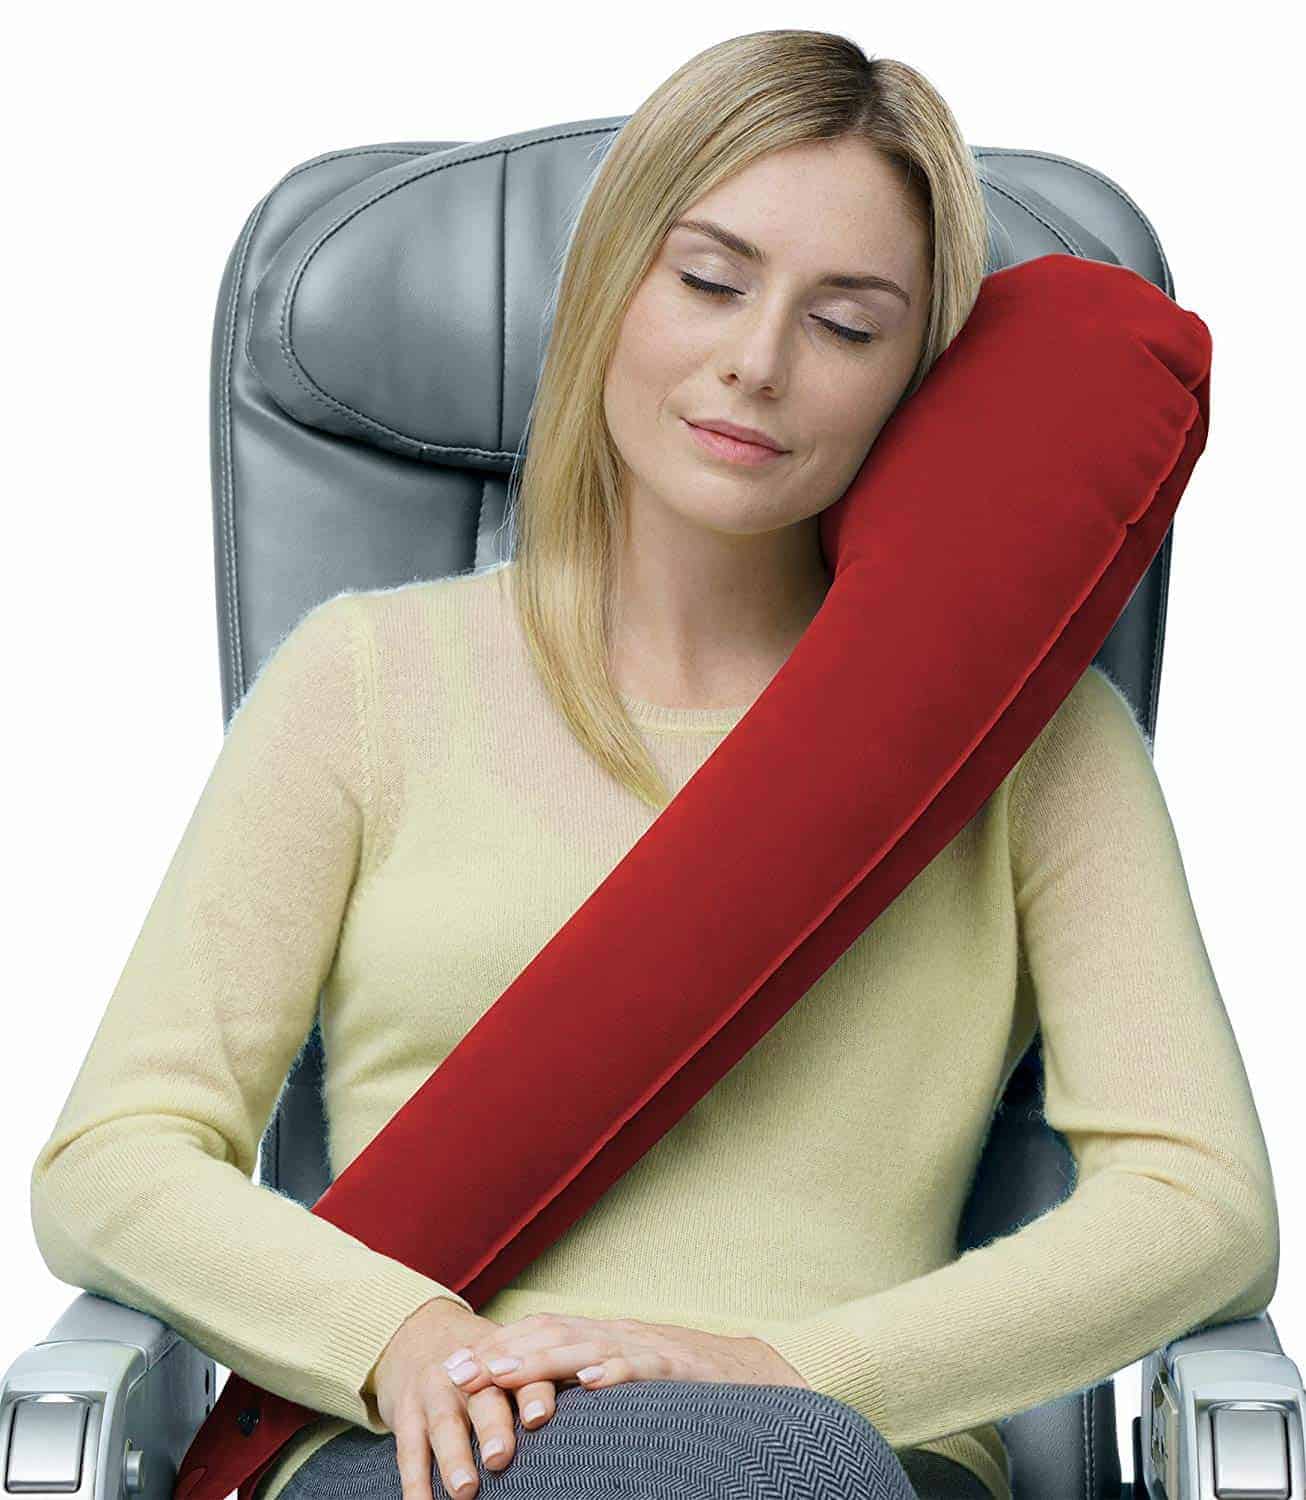 13 Highly Comfortable And Unique Travel Pillows for Travelers